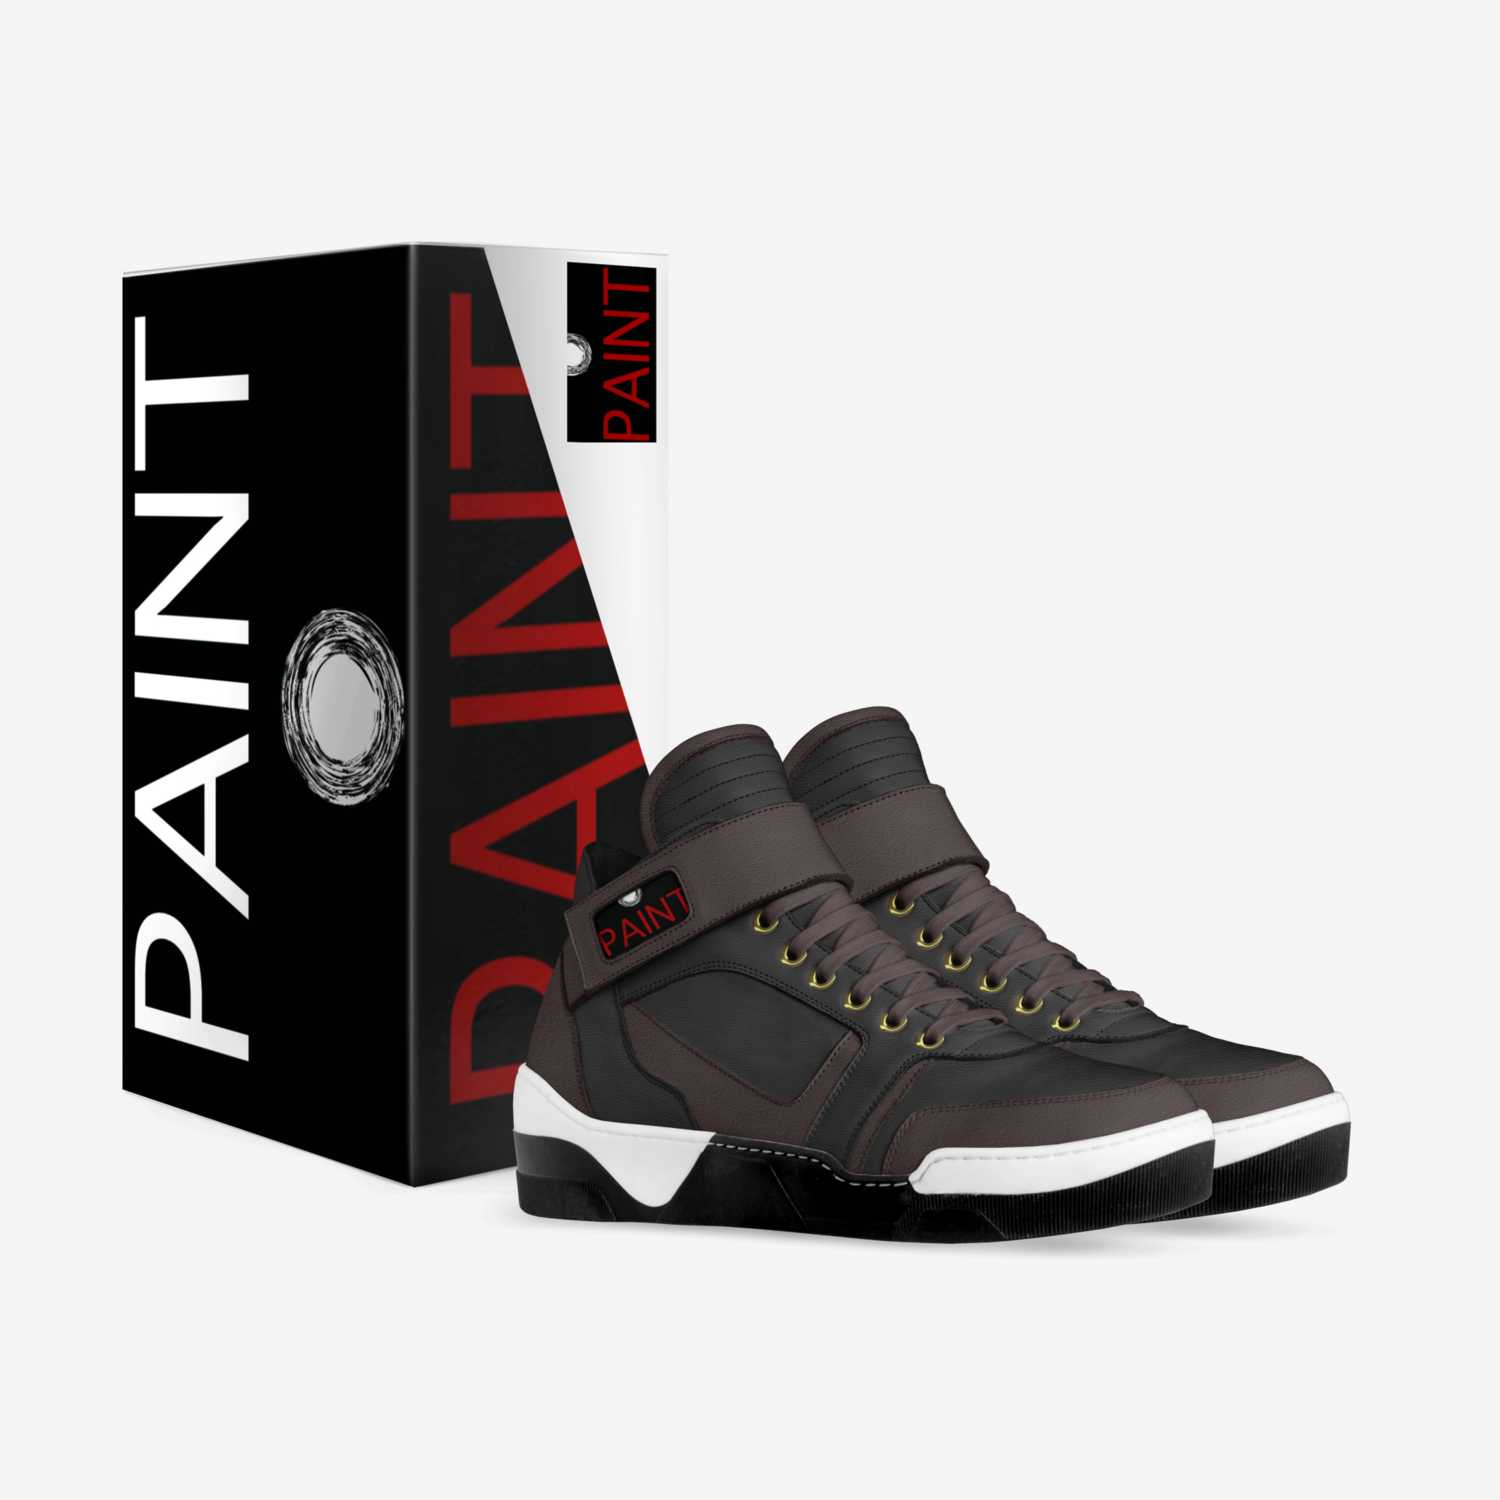 Paint custom made in Italy shoes by Michael Sorensen | Box view